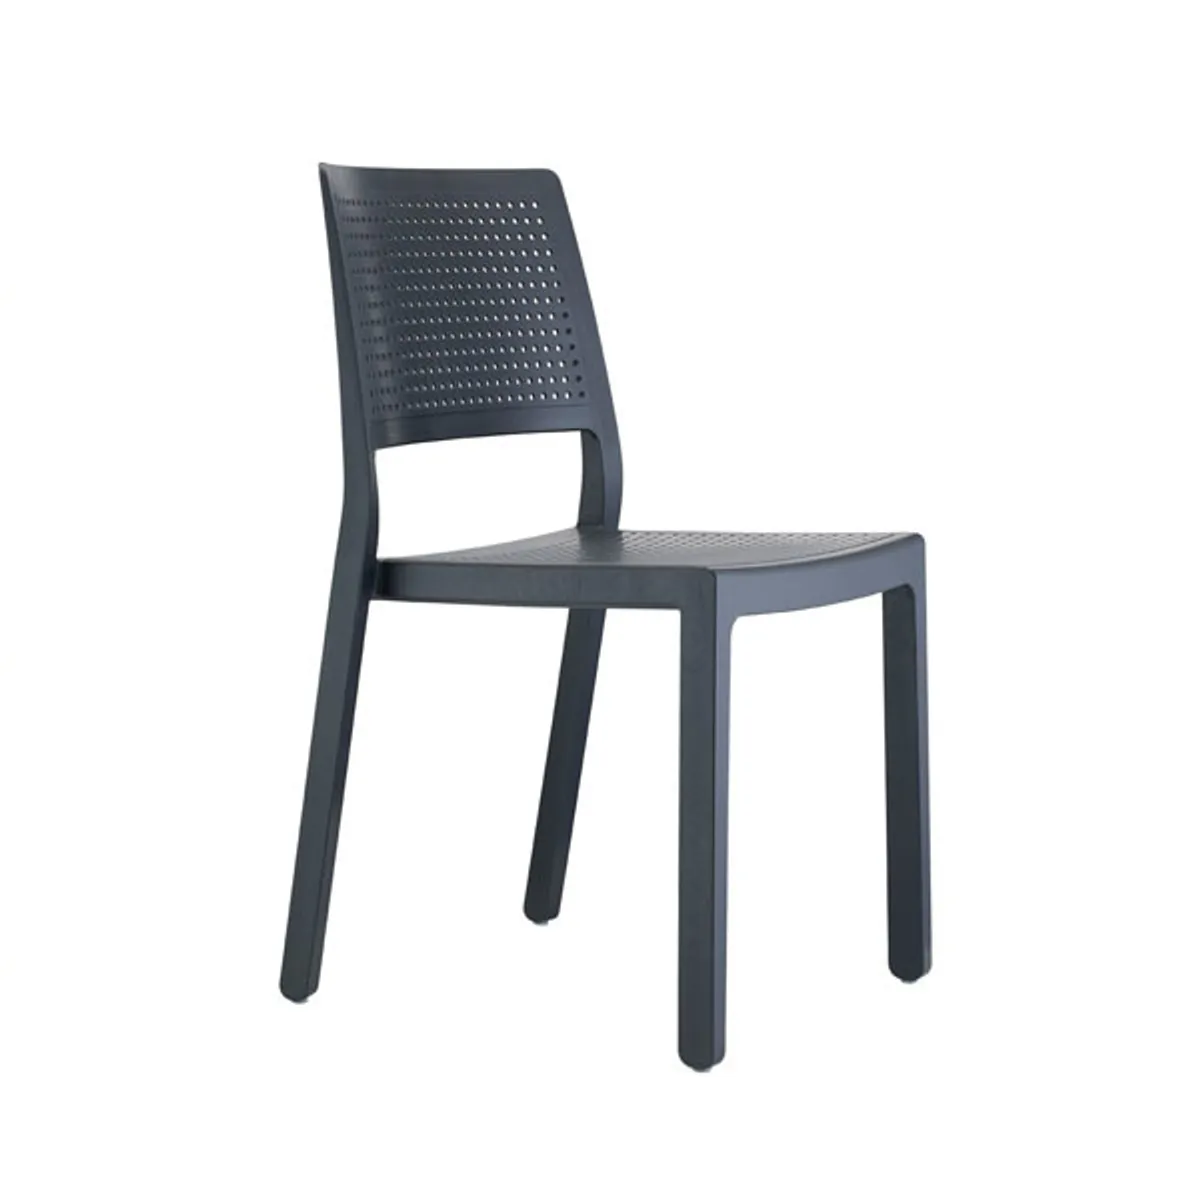 Remi dot side chair 10 Inside Out Contracts